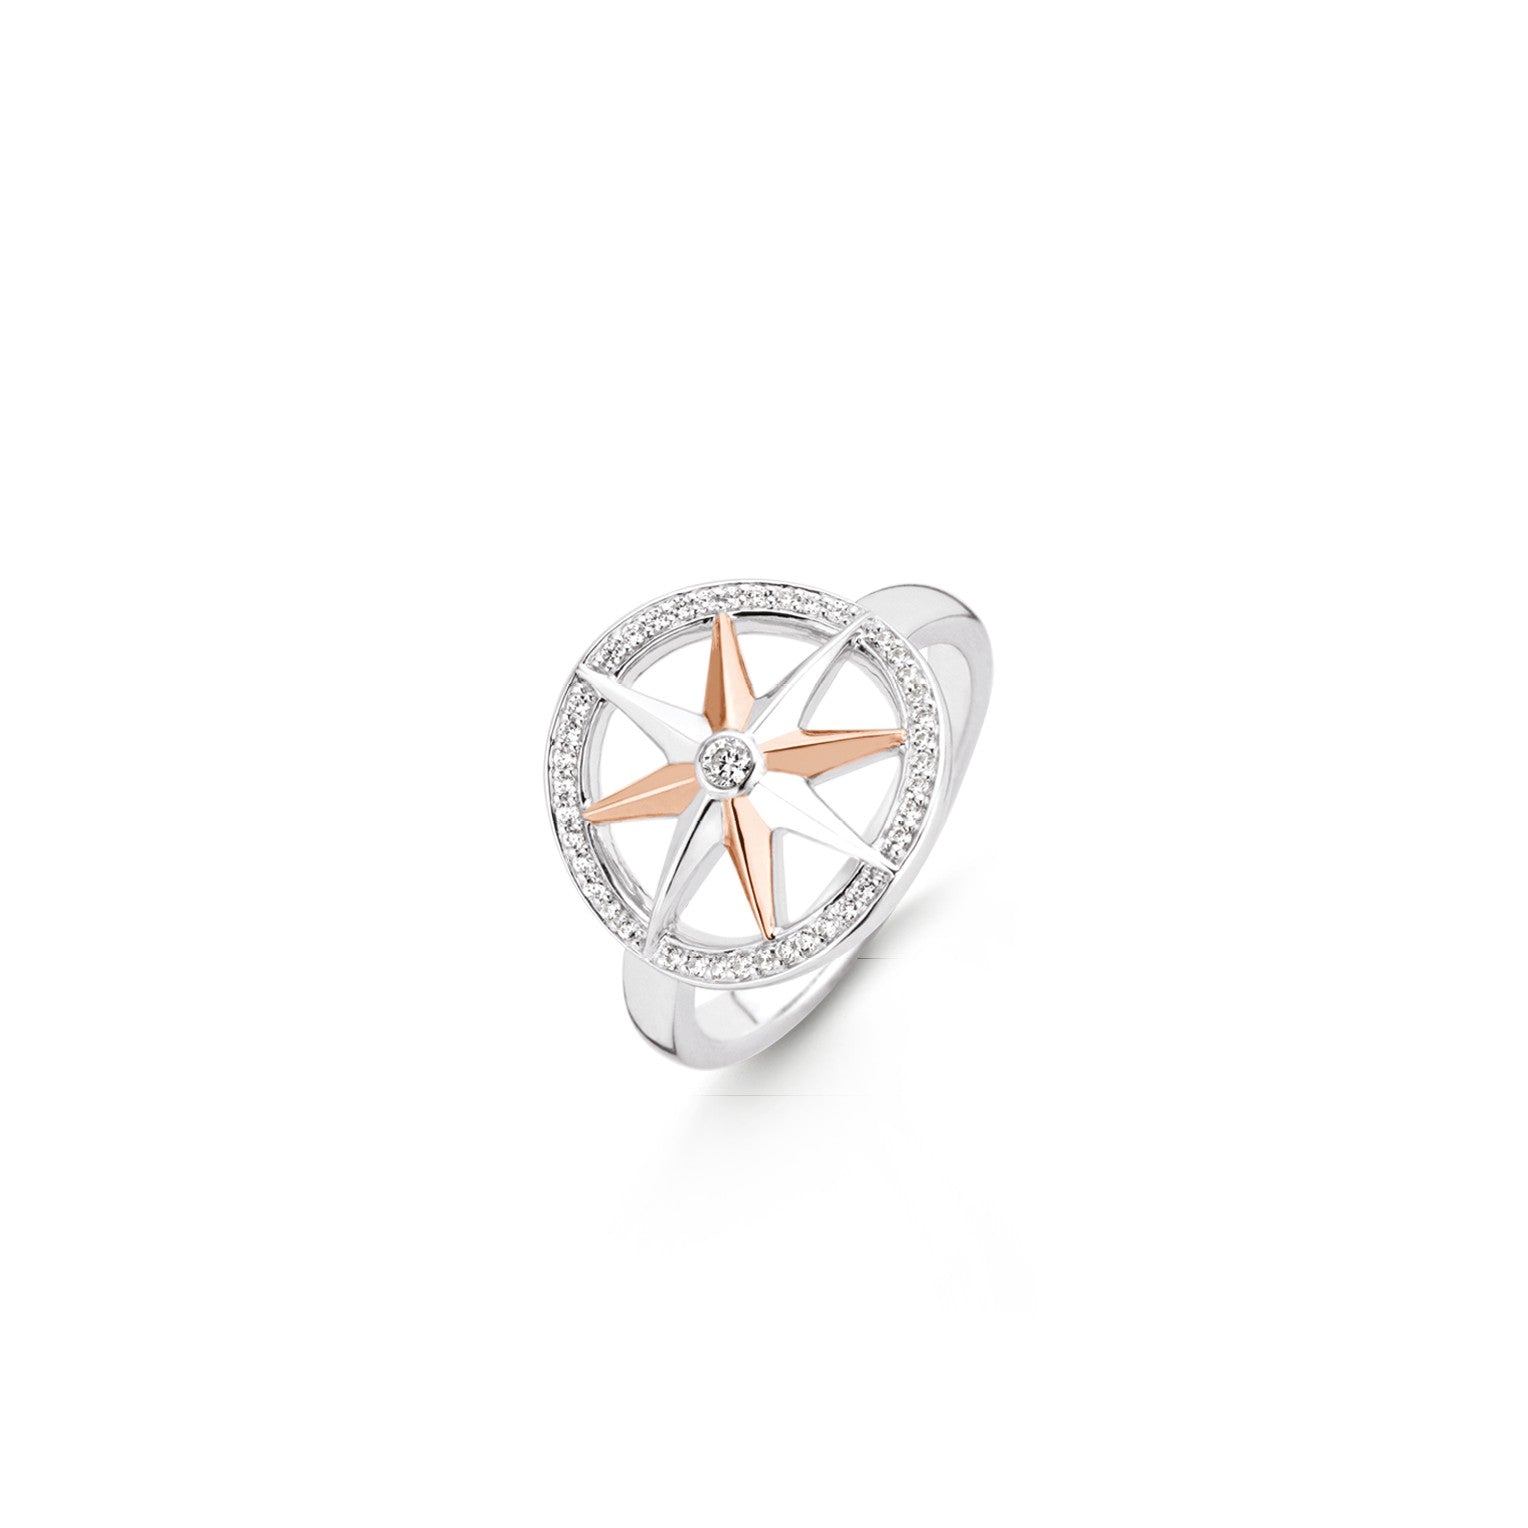 My Compass Ring